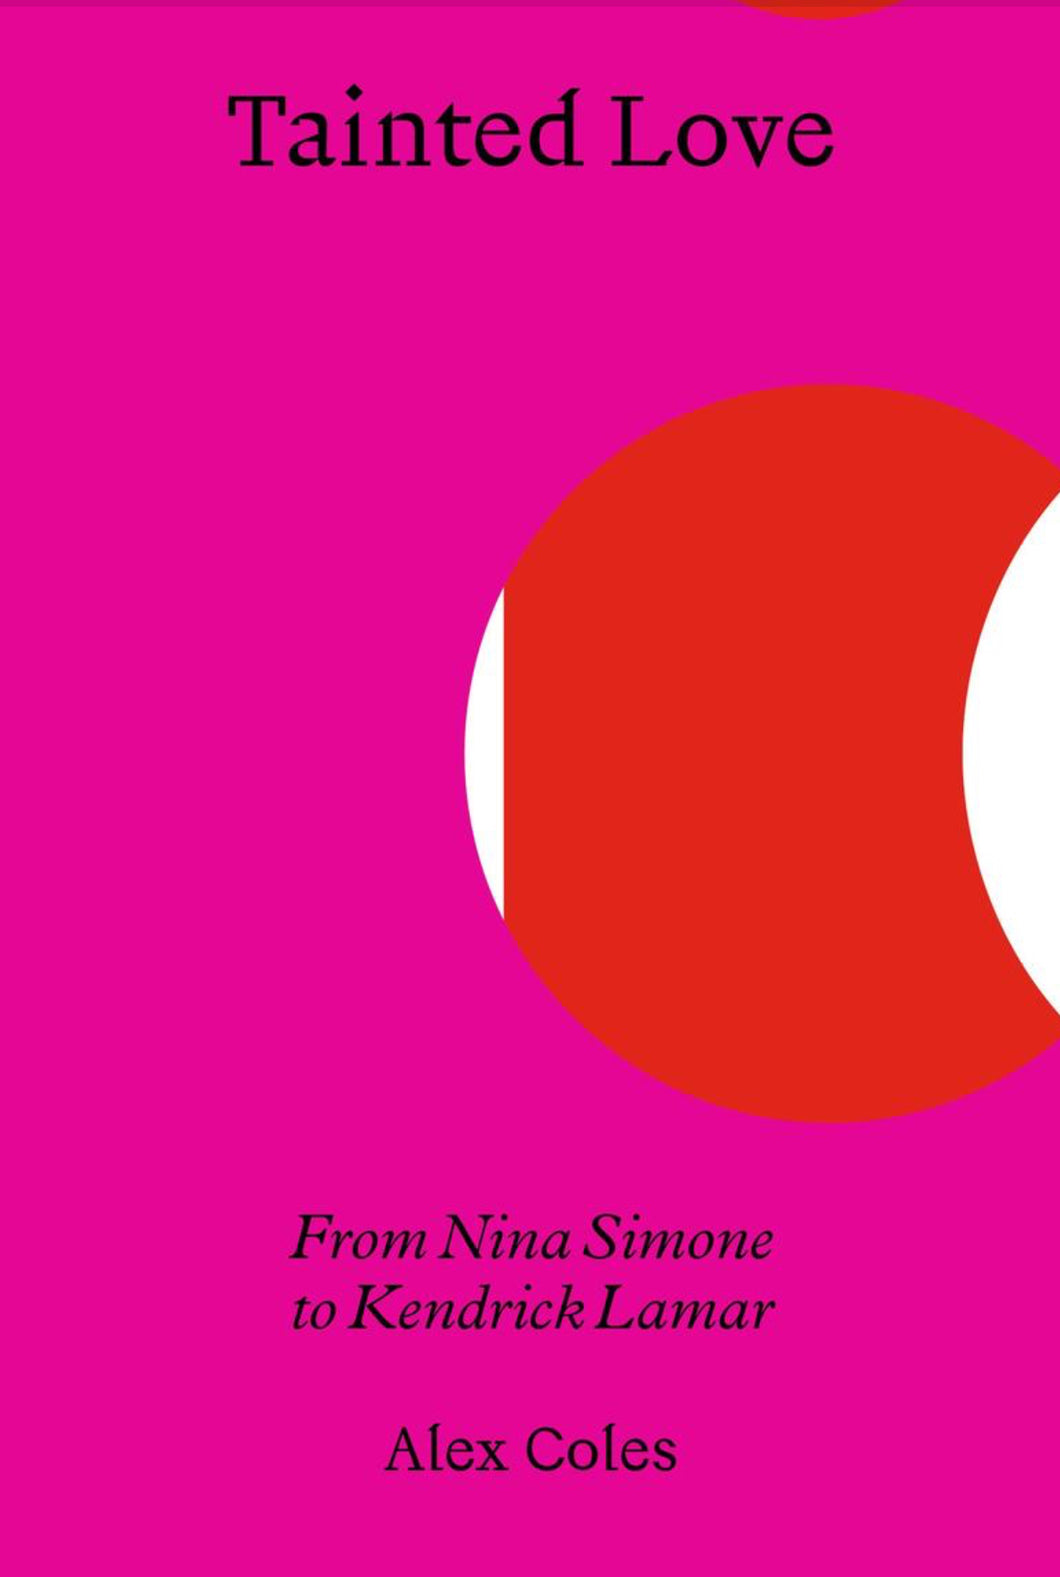 Basket Books: “Tainted Love- From Nina Simone to Kendrick Lamar” by Alex Coles